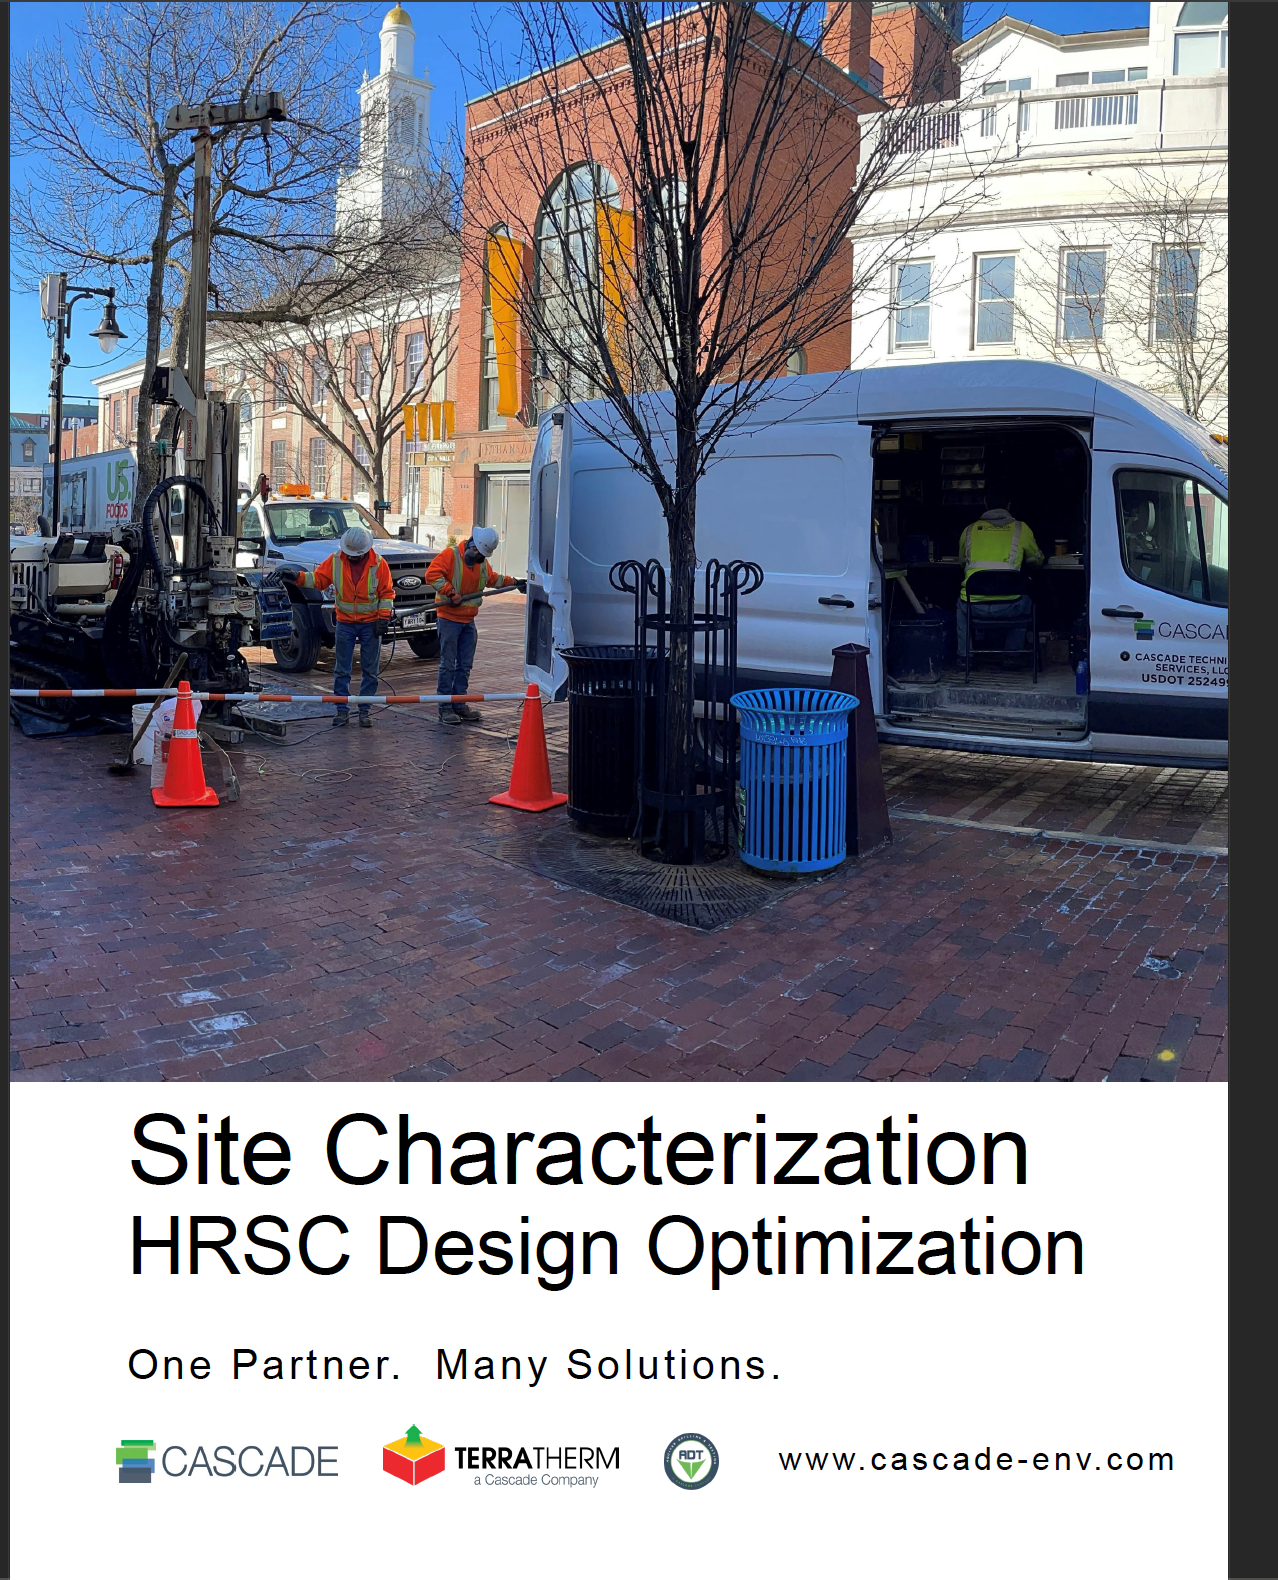 Site Characterization - HRSC Design Optimization Package